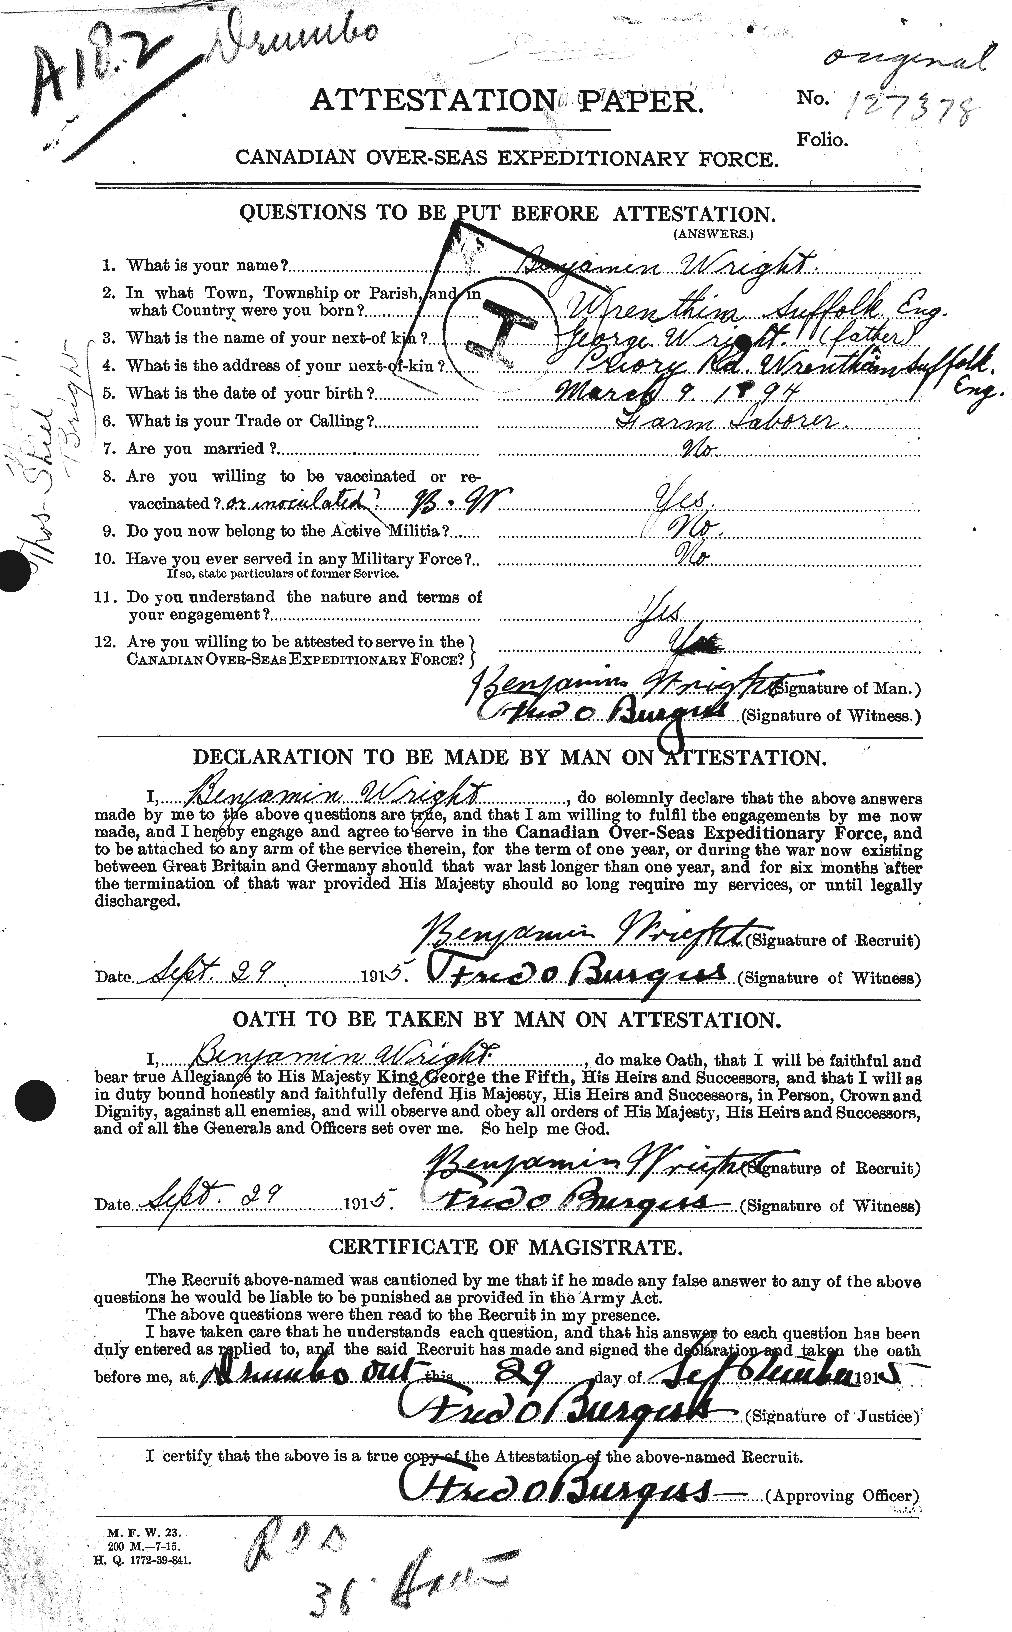 Personnel Records of the First World War - CEF 688198a